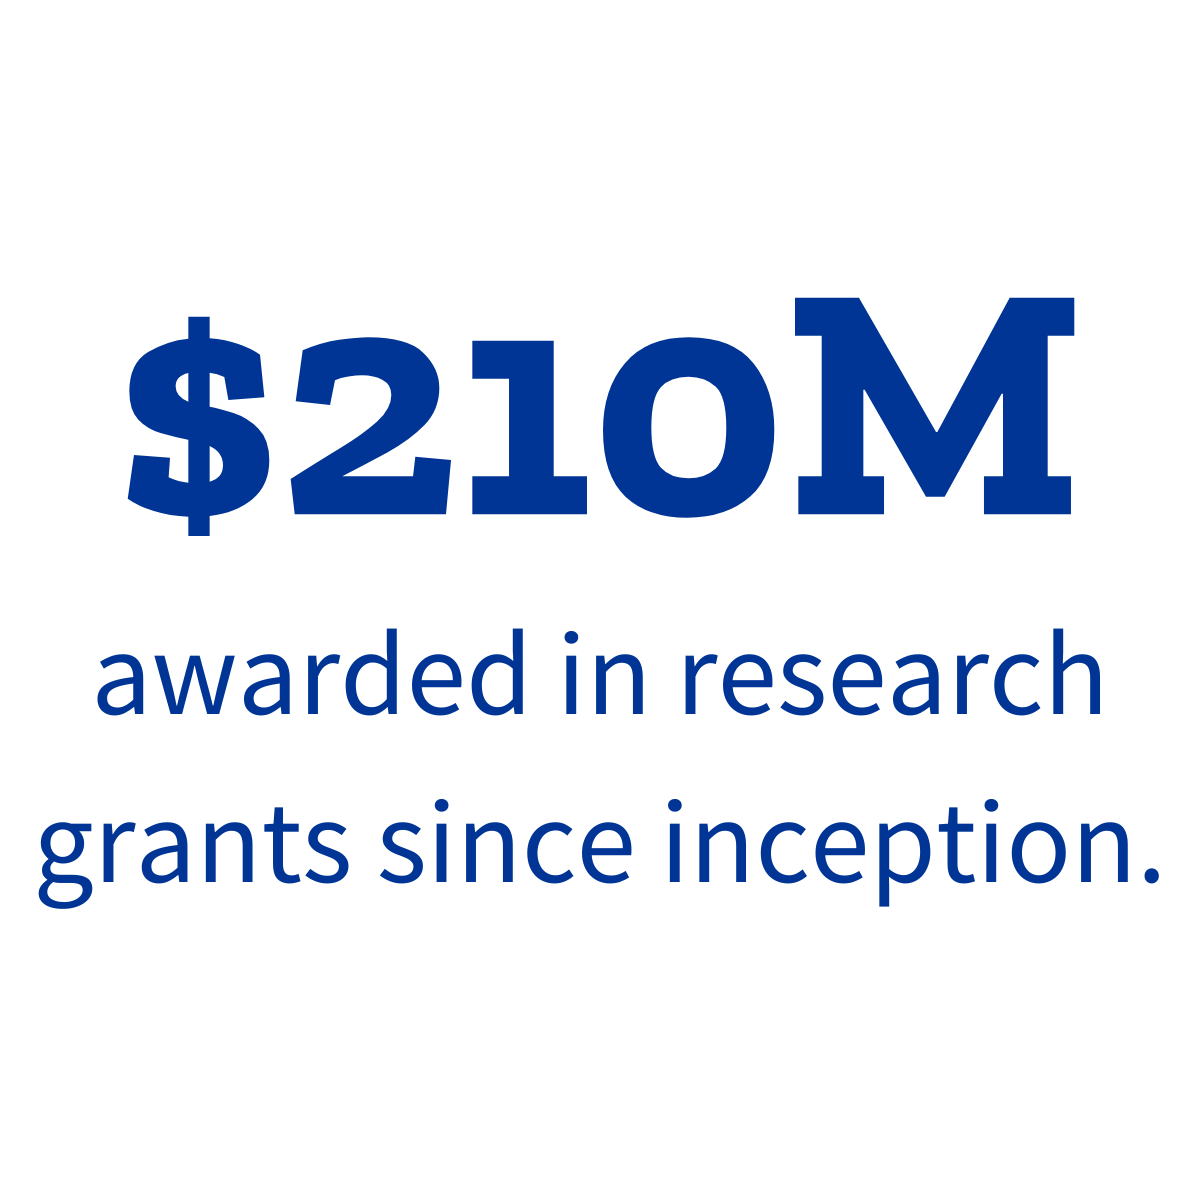 $210 awarded in research grants since inception